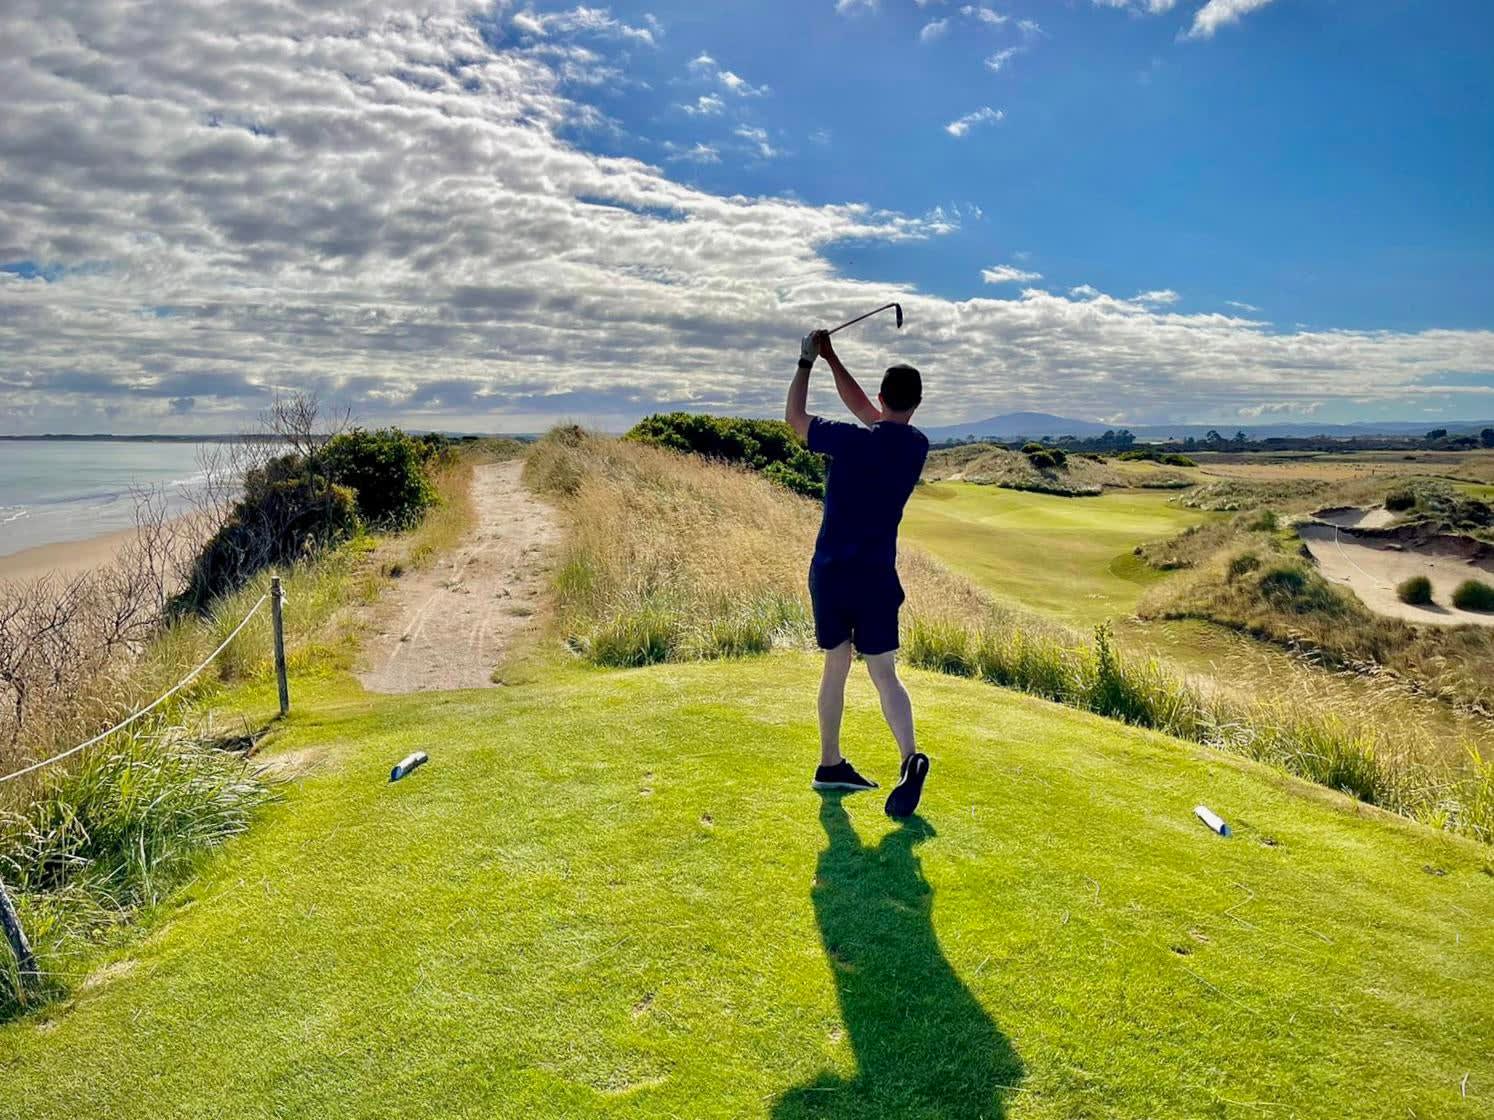 Boxing Day round at Barnbougle, Tasmania. Merry Christmas from a beautiful course!